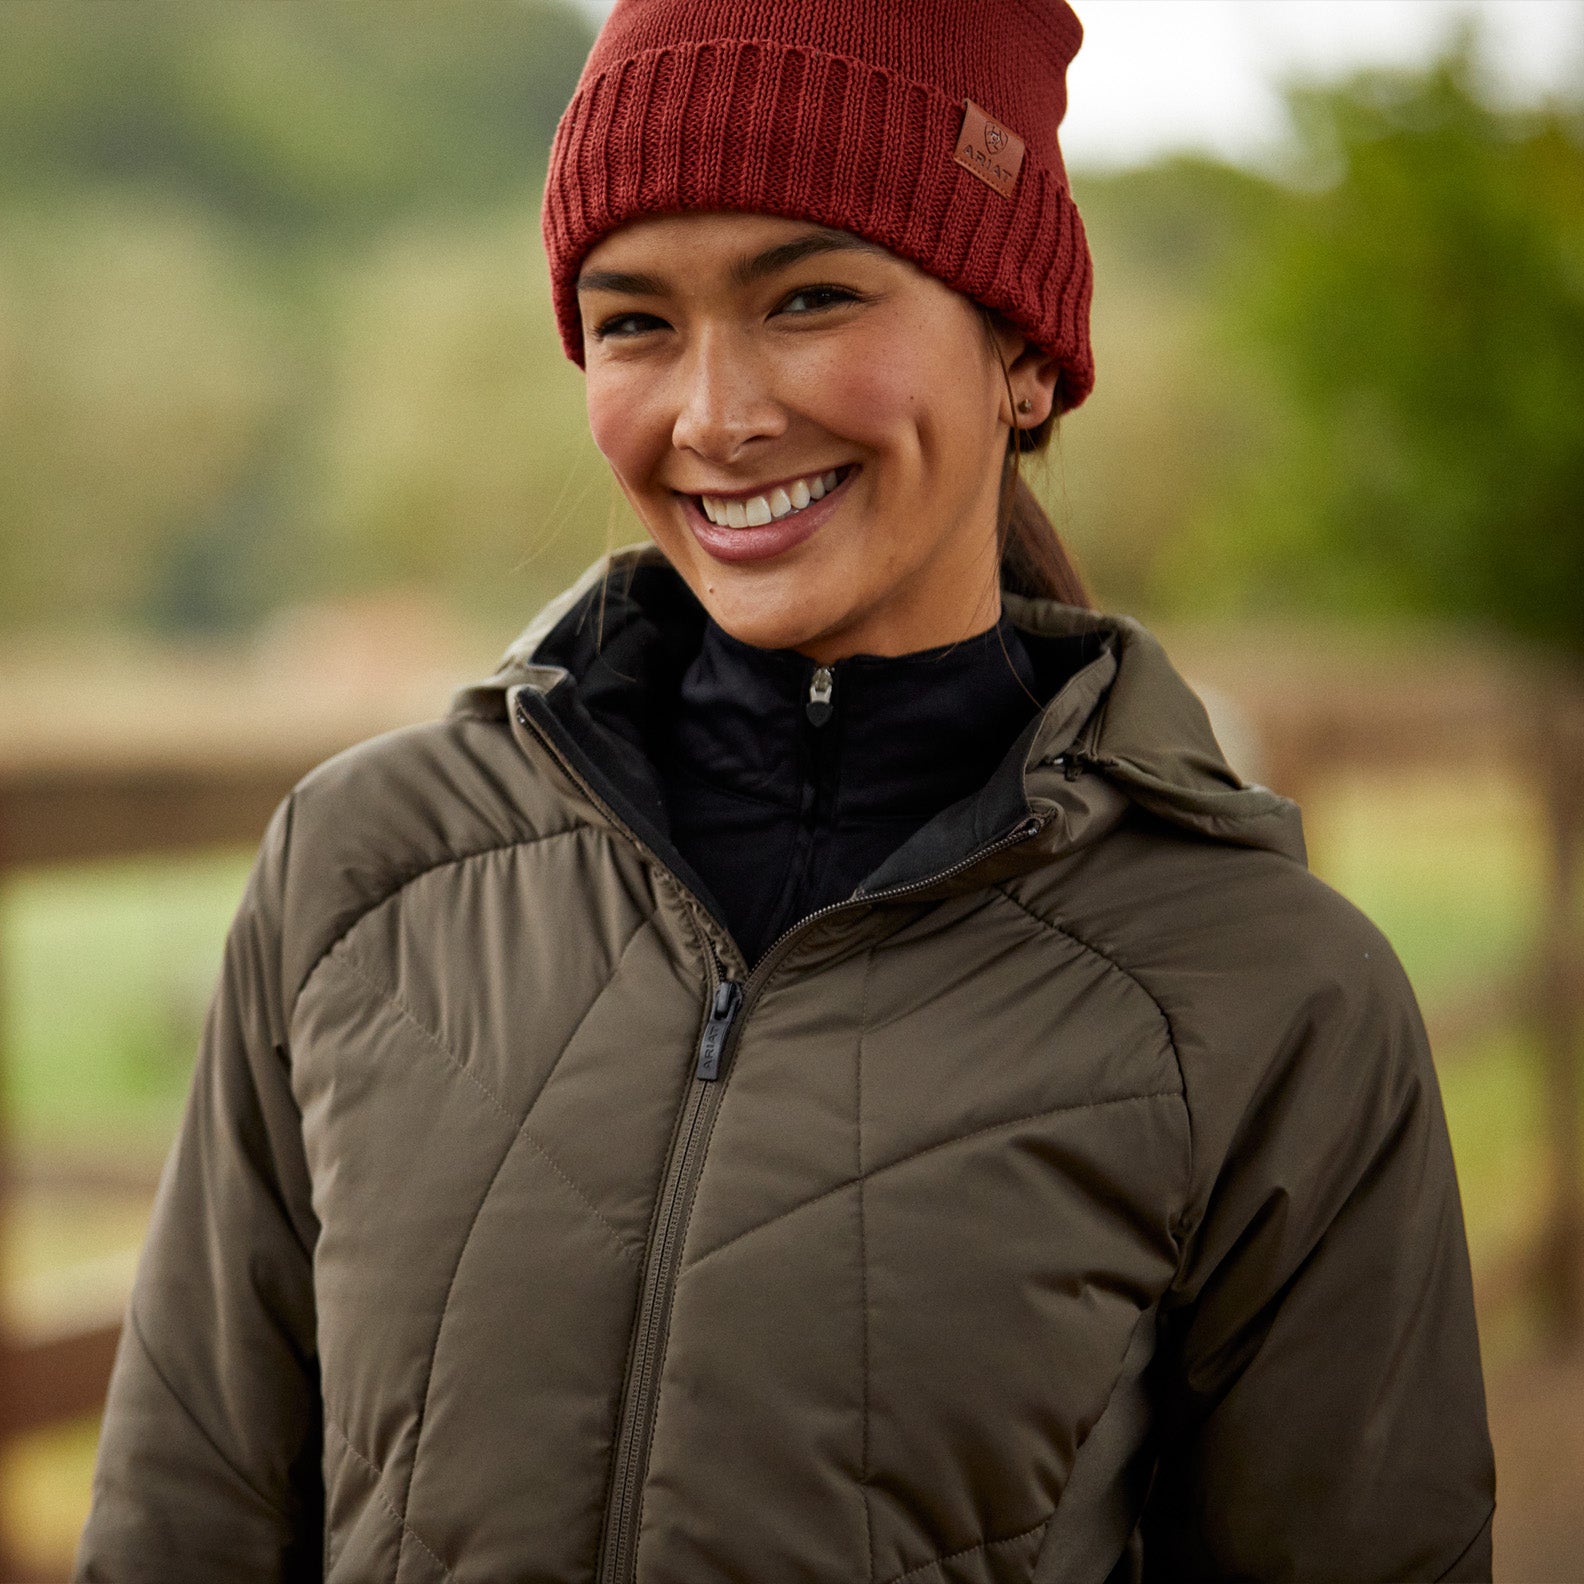 Ariat Zonal Insulated Jacket